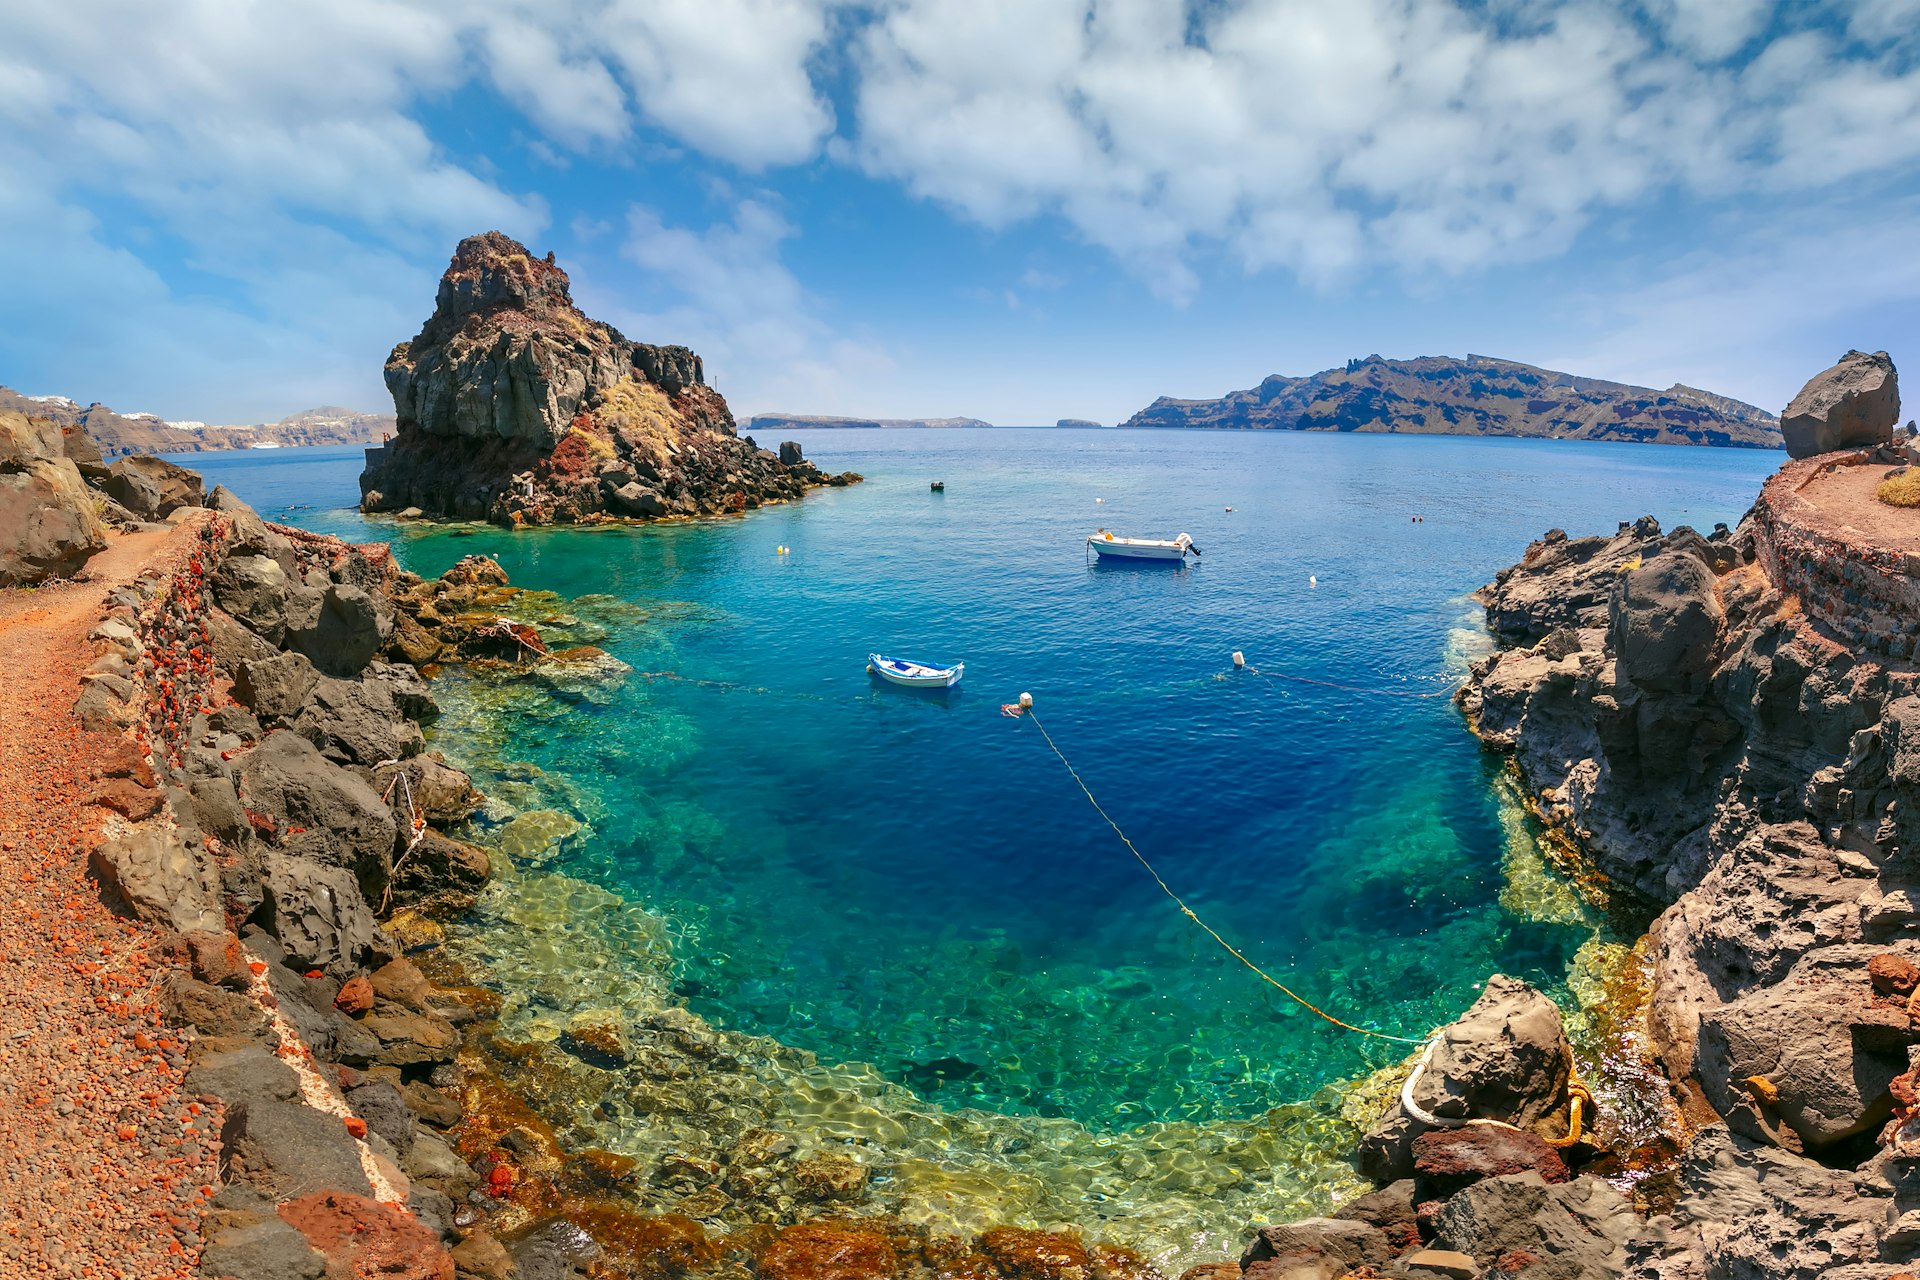 A cove where the red rocky shore meets bright and clear turquoise waters.  